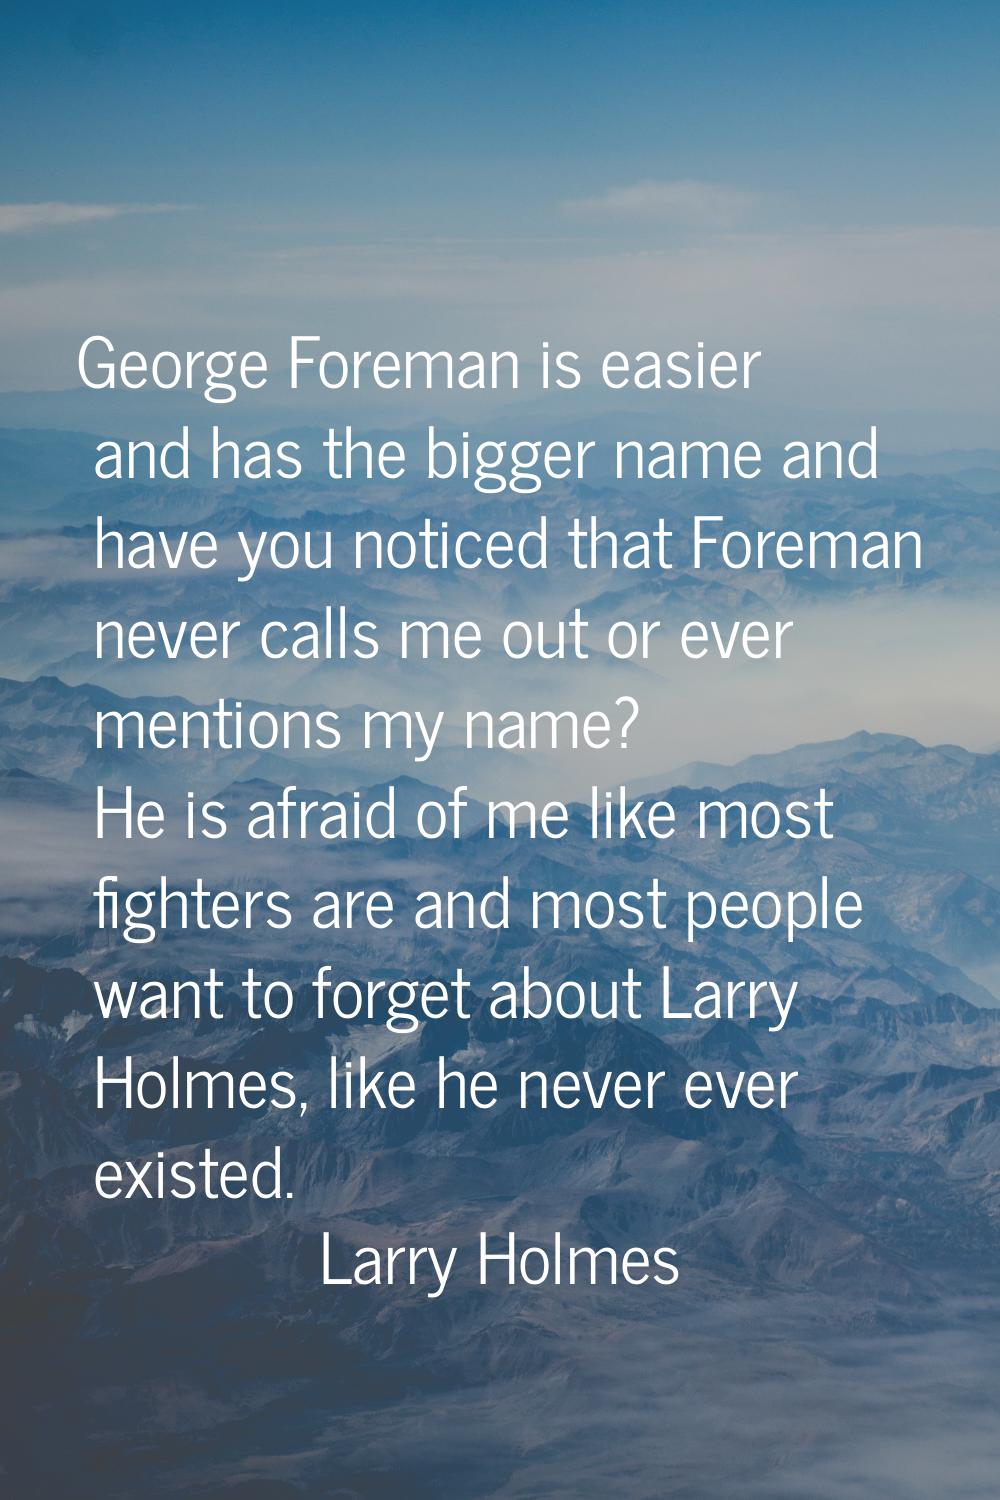 George Foreman is easier and has the bigger name and have you noticed that Foreman never calls me o